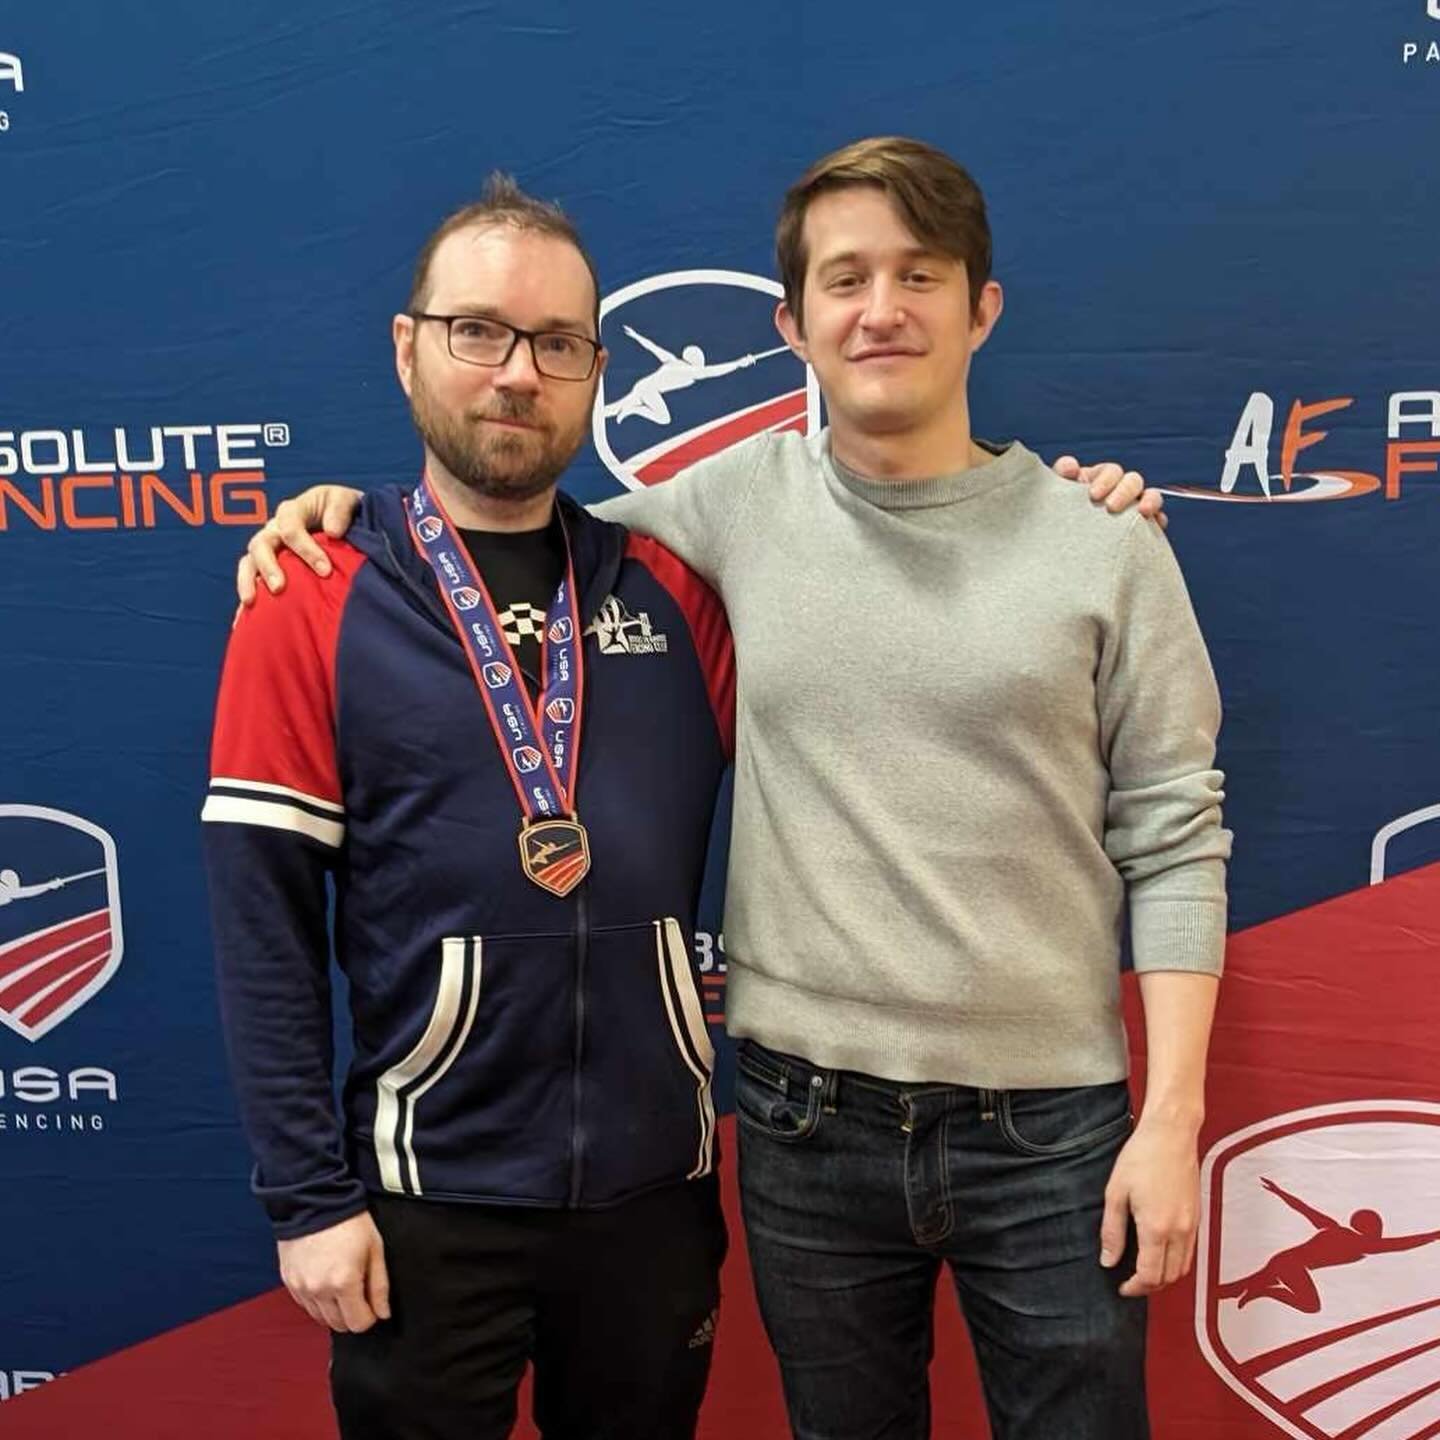 Congratulations to Michael on his impressive 6th place finish in the Vet 40 Men&rsquo;s Foil! A fantastic return to competing after an injury - with Coach Andrew by his side. Way to go, Michael! 

@usafencing @brooklynbridgefencing #Fencing #fencer #